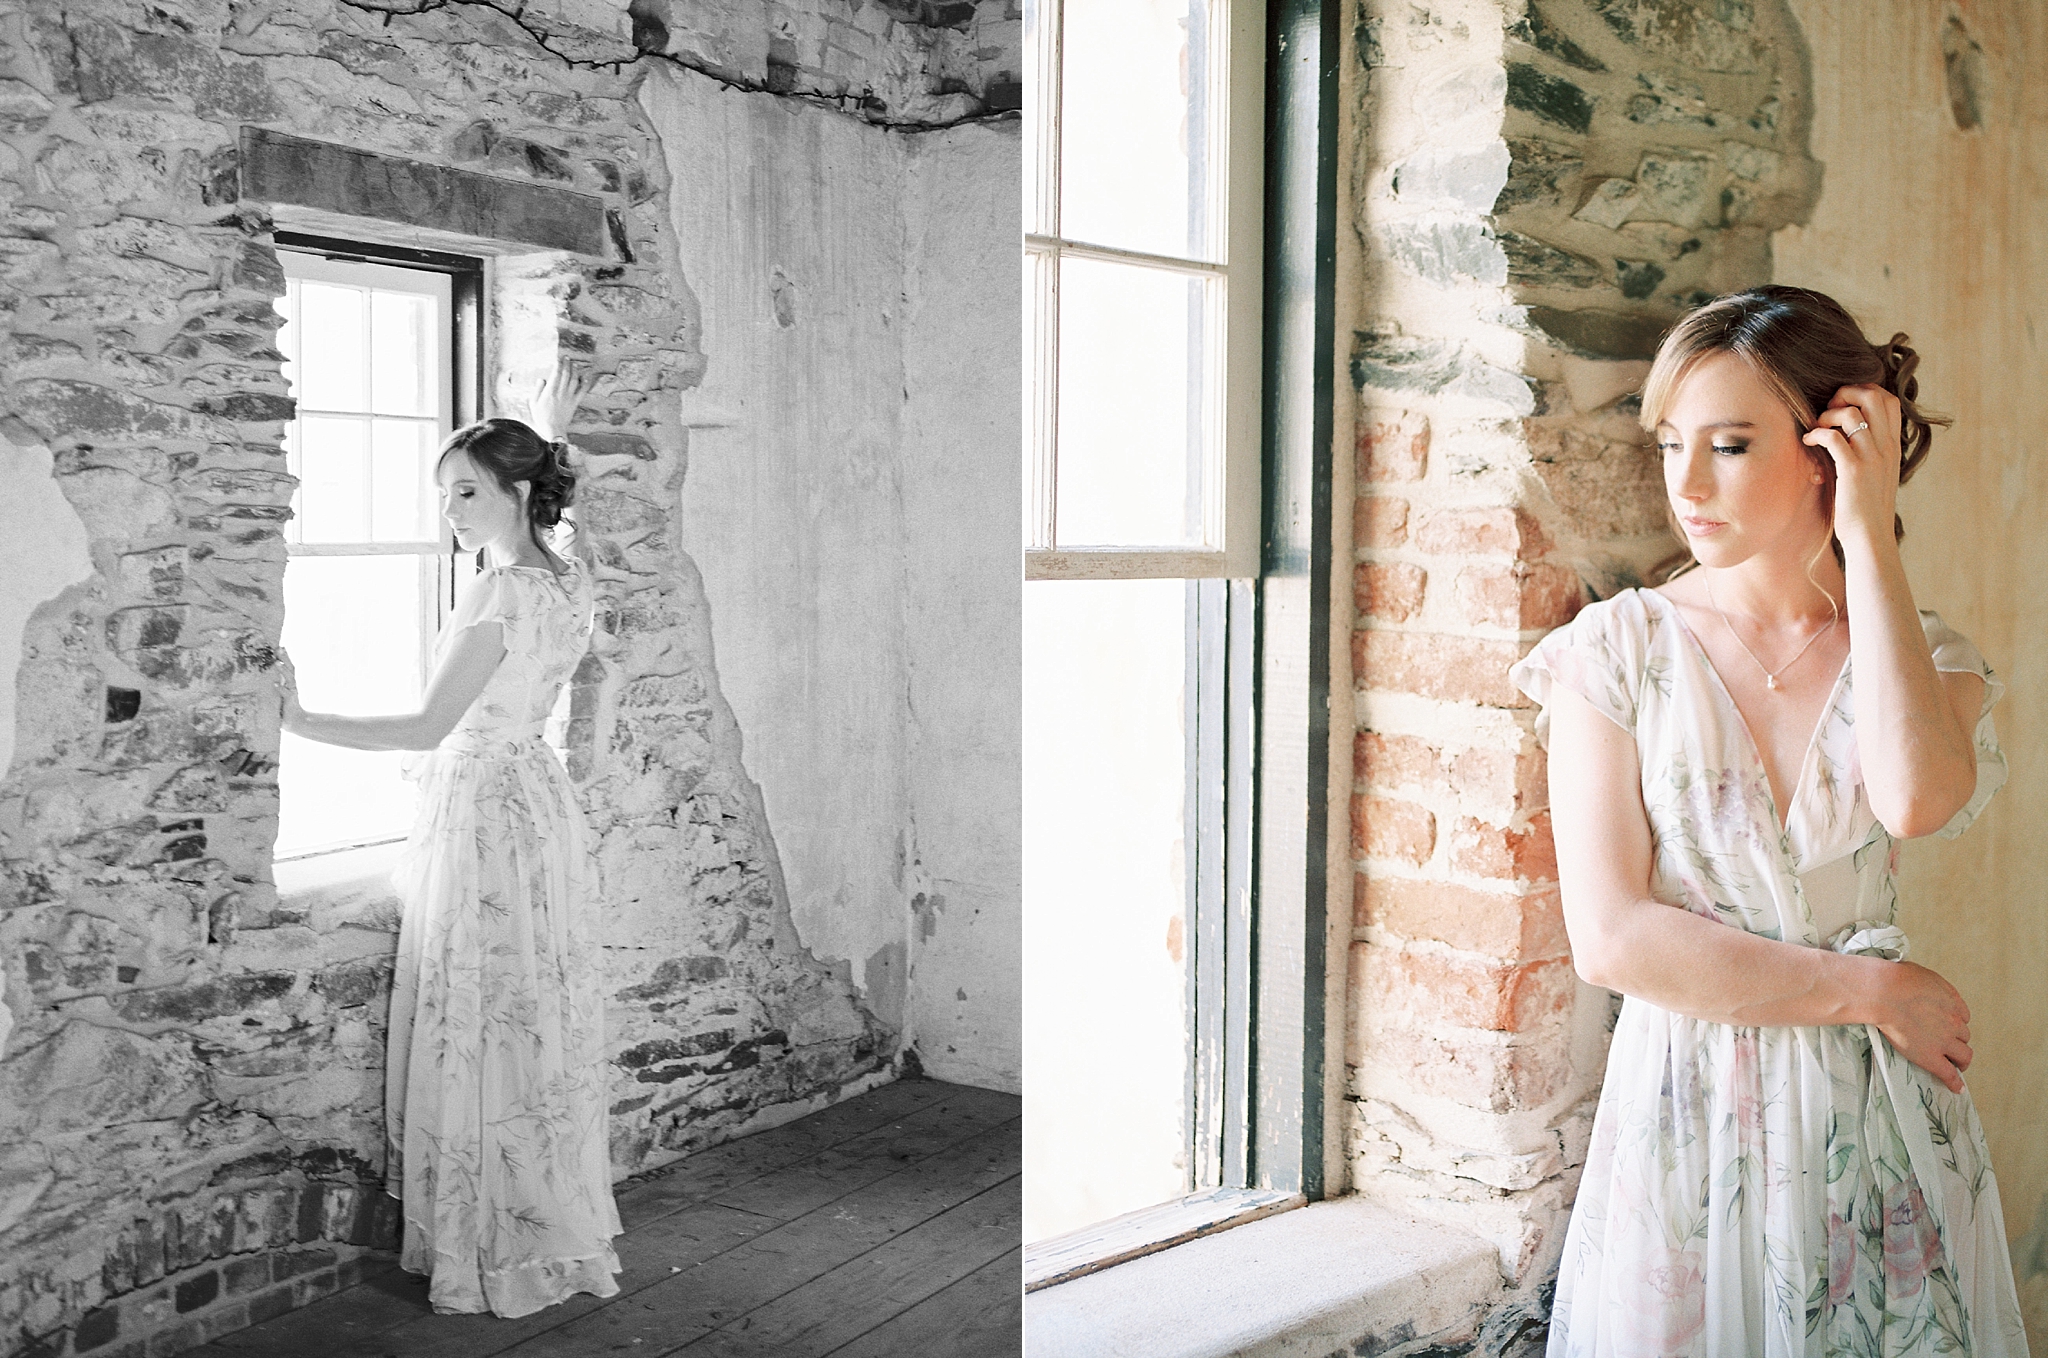 Classic and timeless boudoir portraits are captured by Washington, DC fine art wedding photographer, Alicia Lacey at Oatlands Plantation in Leesburg, VA.